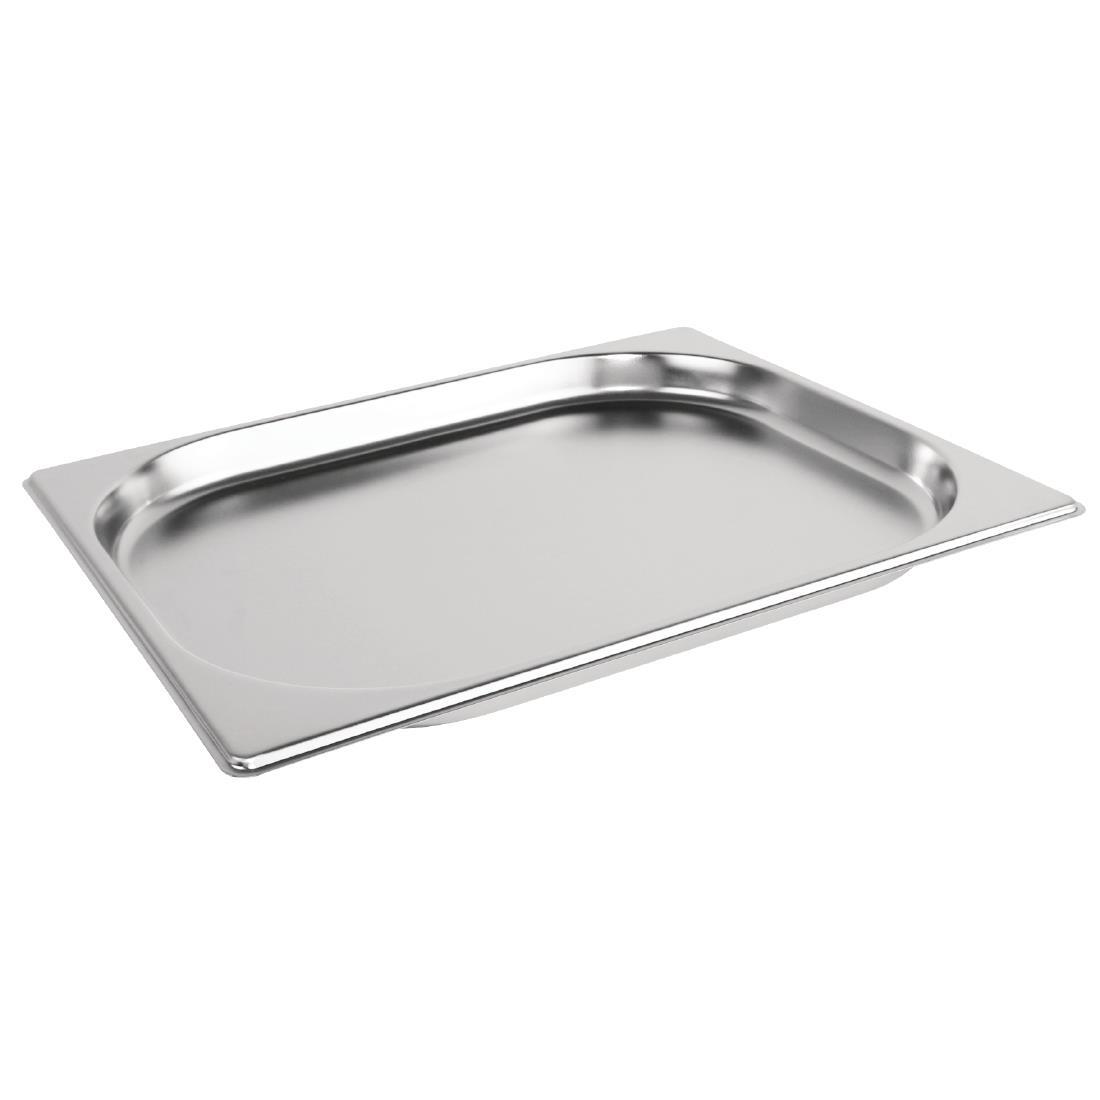 Vogue Stainless Steel 1/2 Gastronorm Pan 20mm - K906  - 1